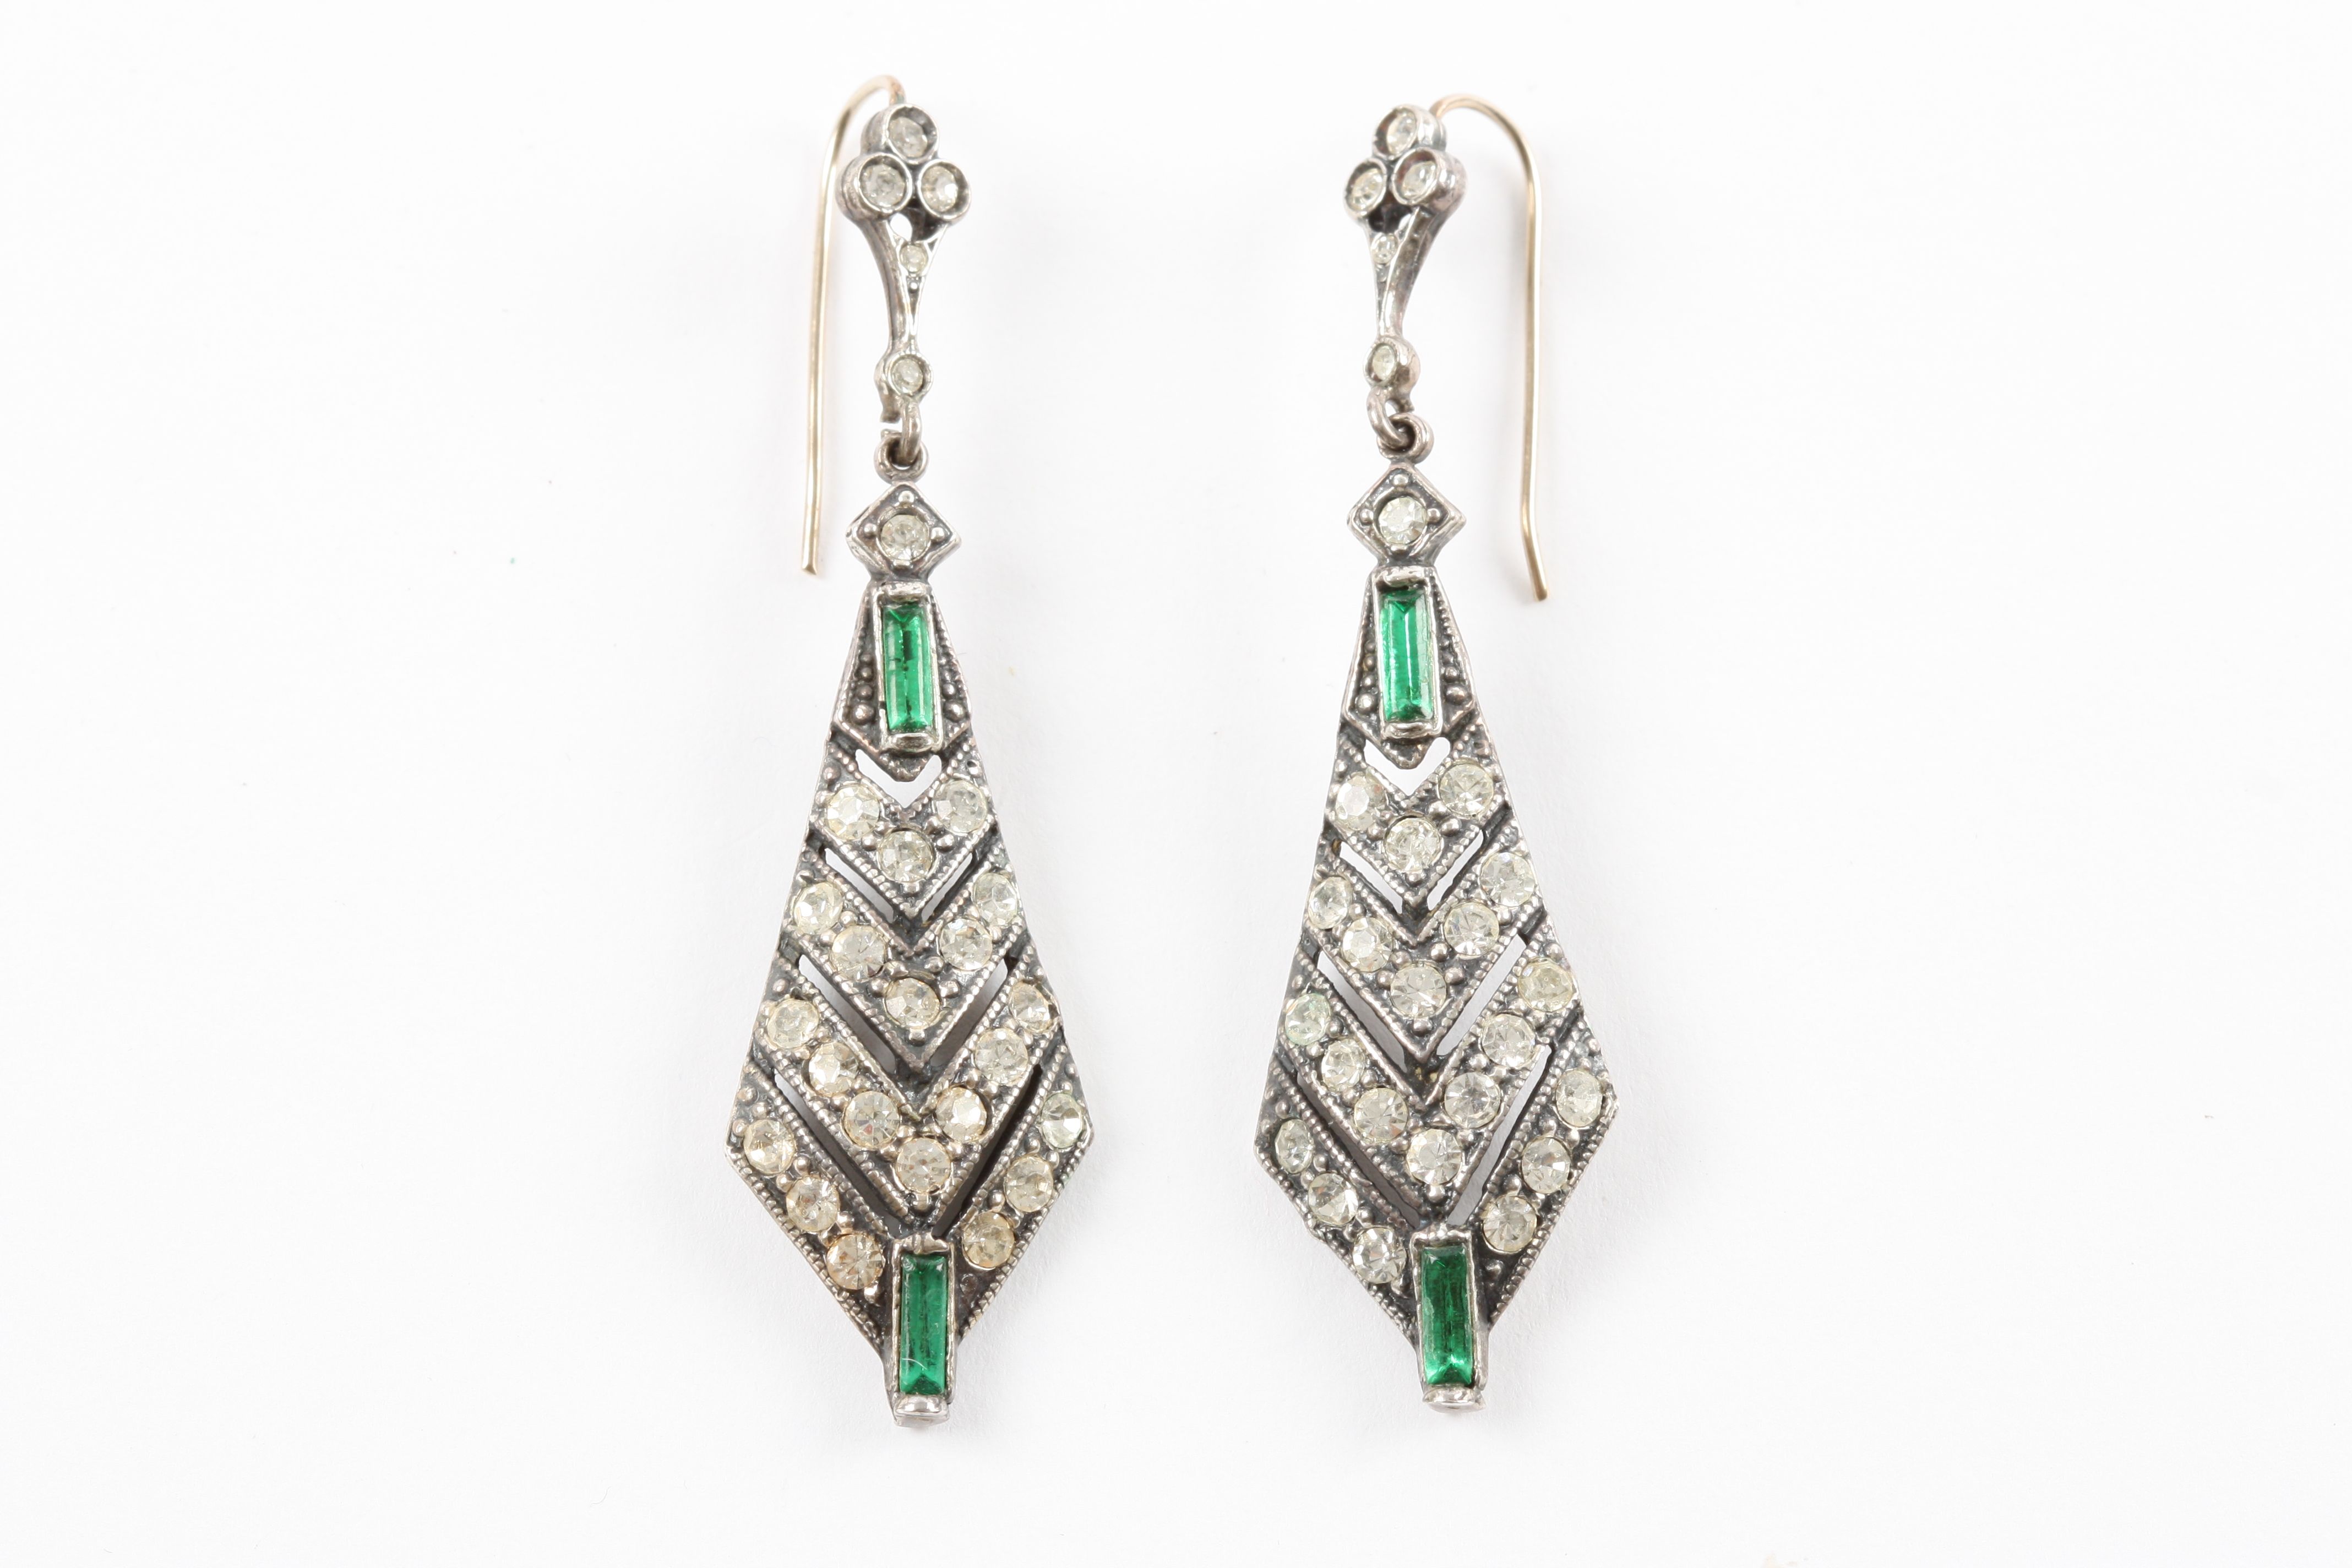 A pair of Art Deco style costume jewellery earrings formed as suspended arrow heads with rows of